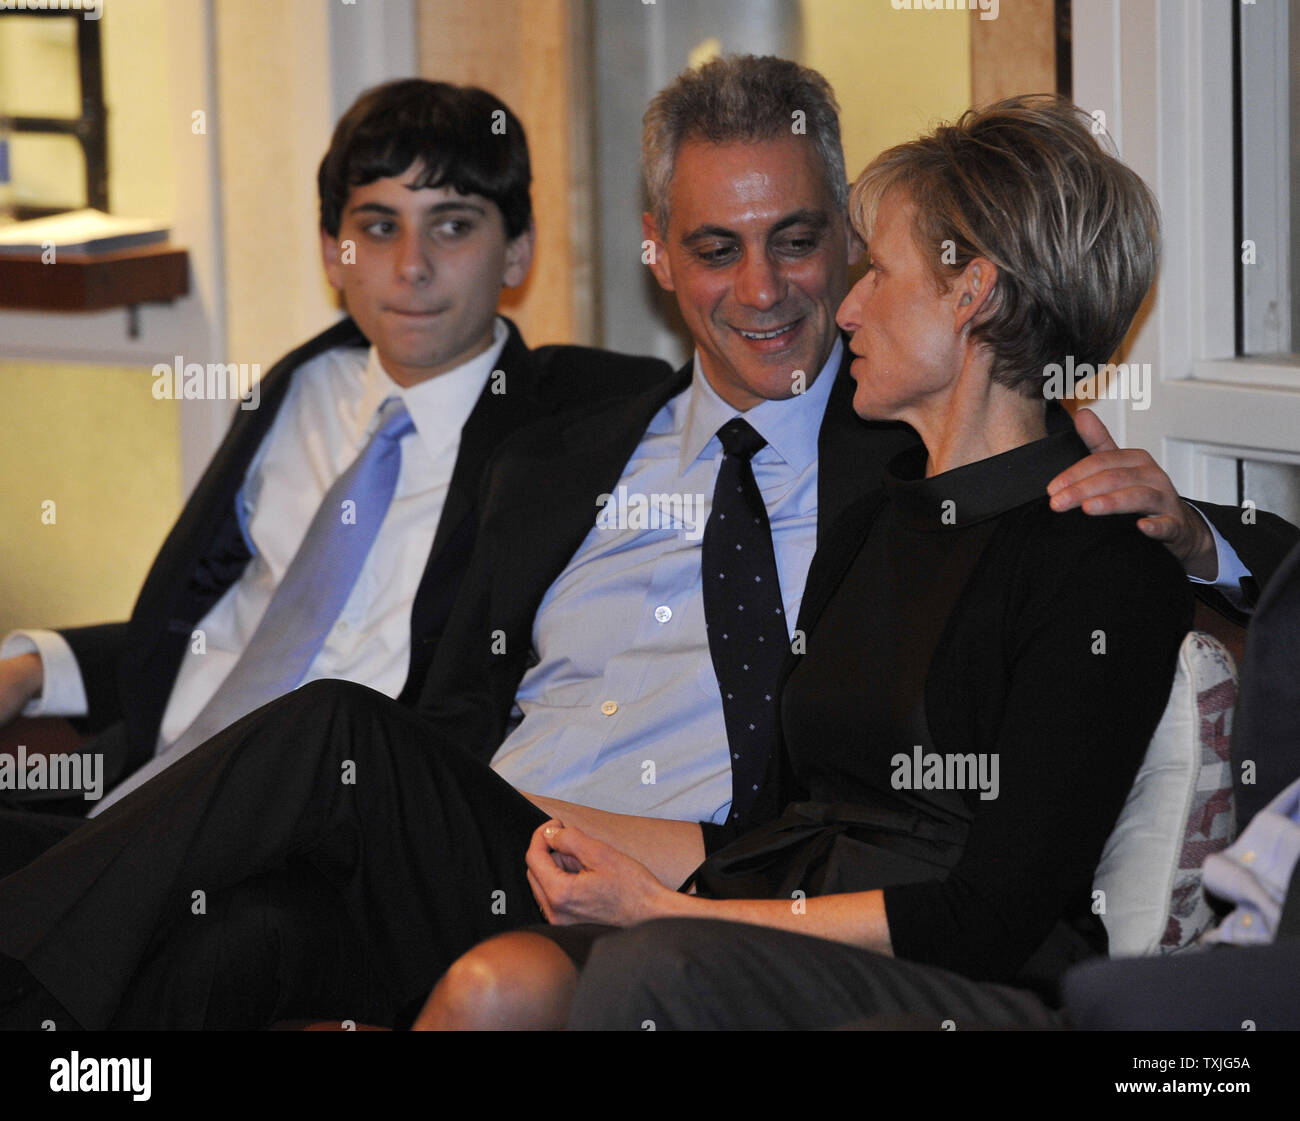 Chicago Mayoral candidate Rahm Emanuel (C) watches election returns with his son Zach (L) and wife Amy Rule before an election-night rally in Chicago on February 22, 2011.       UPI/Brian Kersey Stock Photo